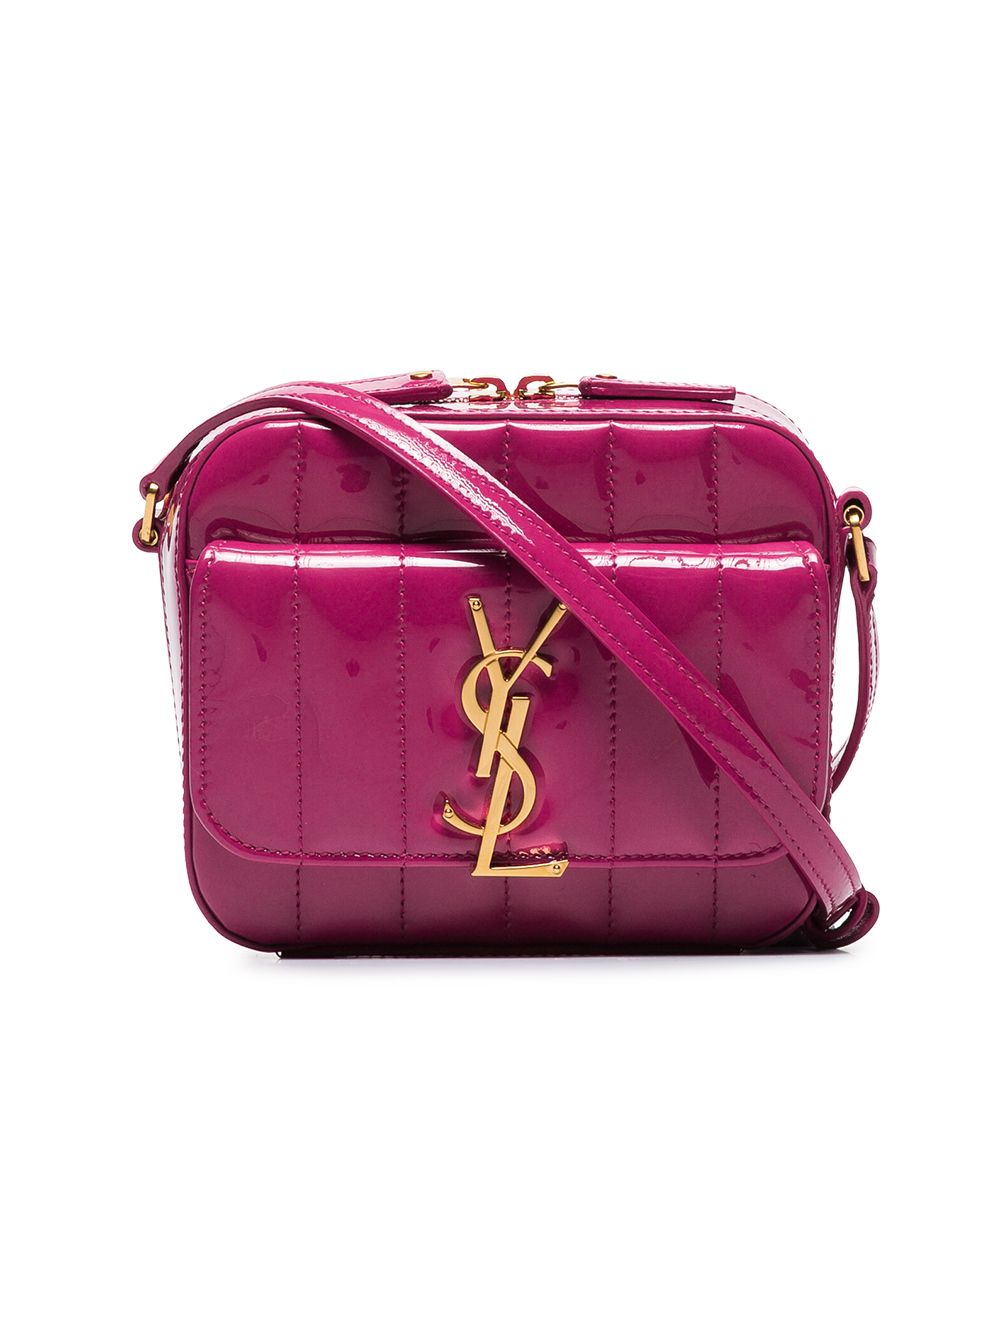 Saint Laurent Vicky Camera Bag In Quilted Patent Leather In 5463 Pink